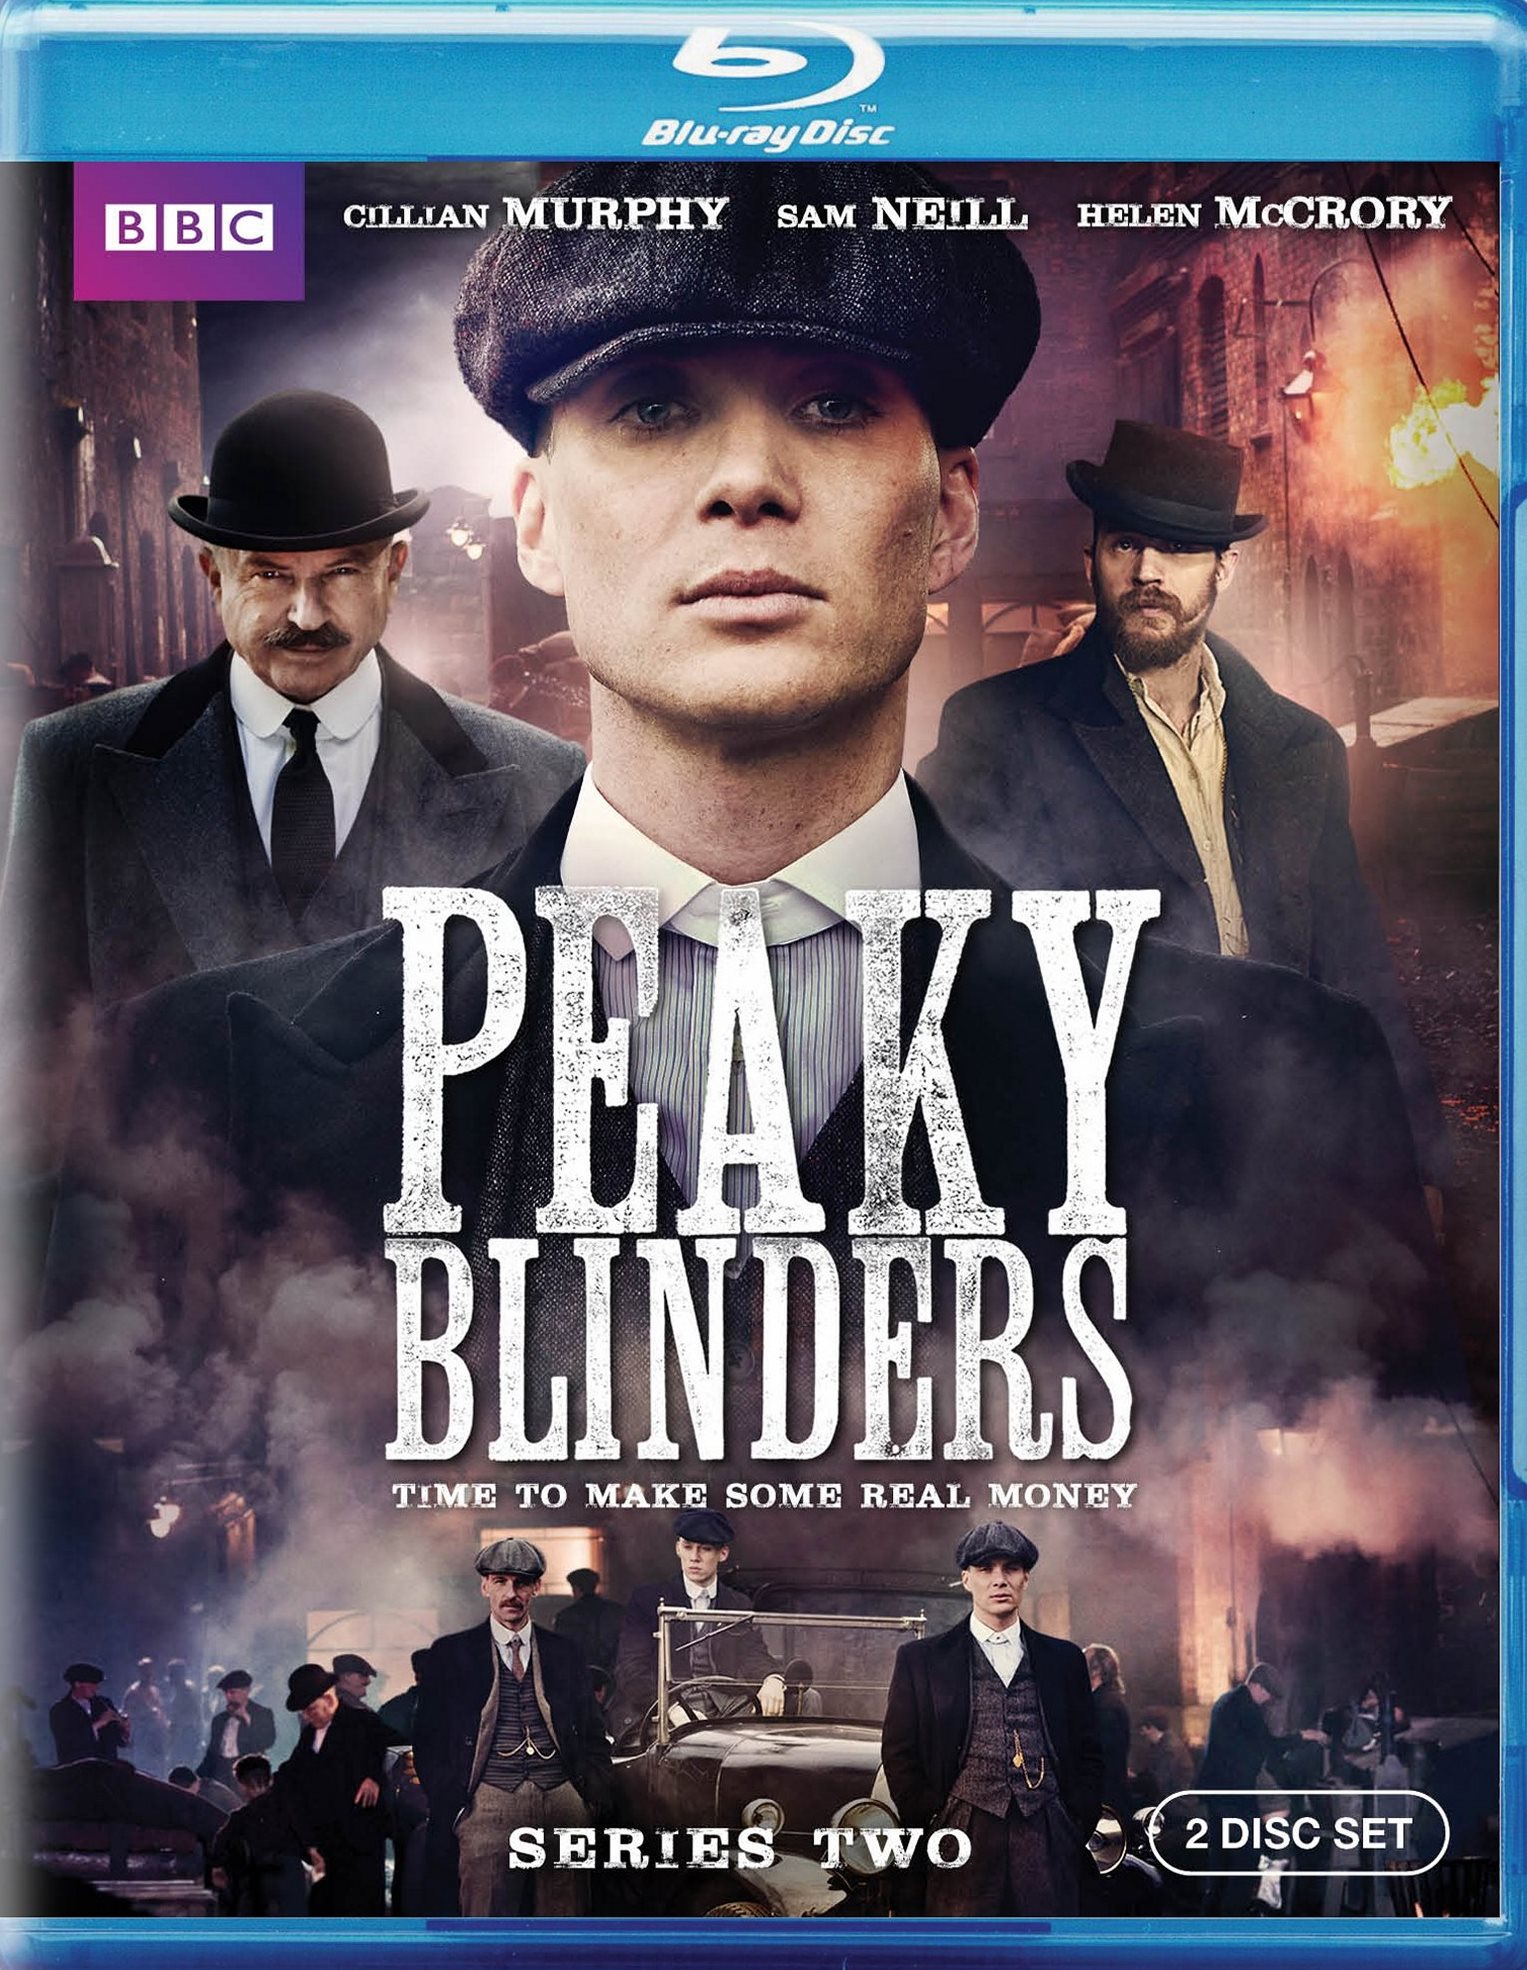  Peaky Blinders - The Complete Collection [Blu-ray